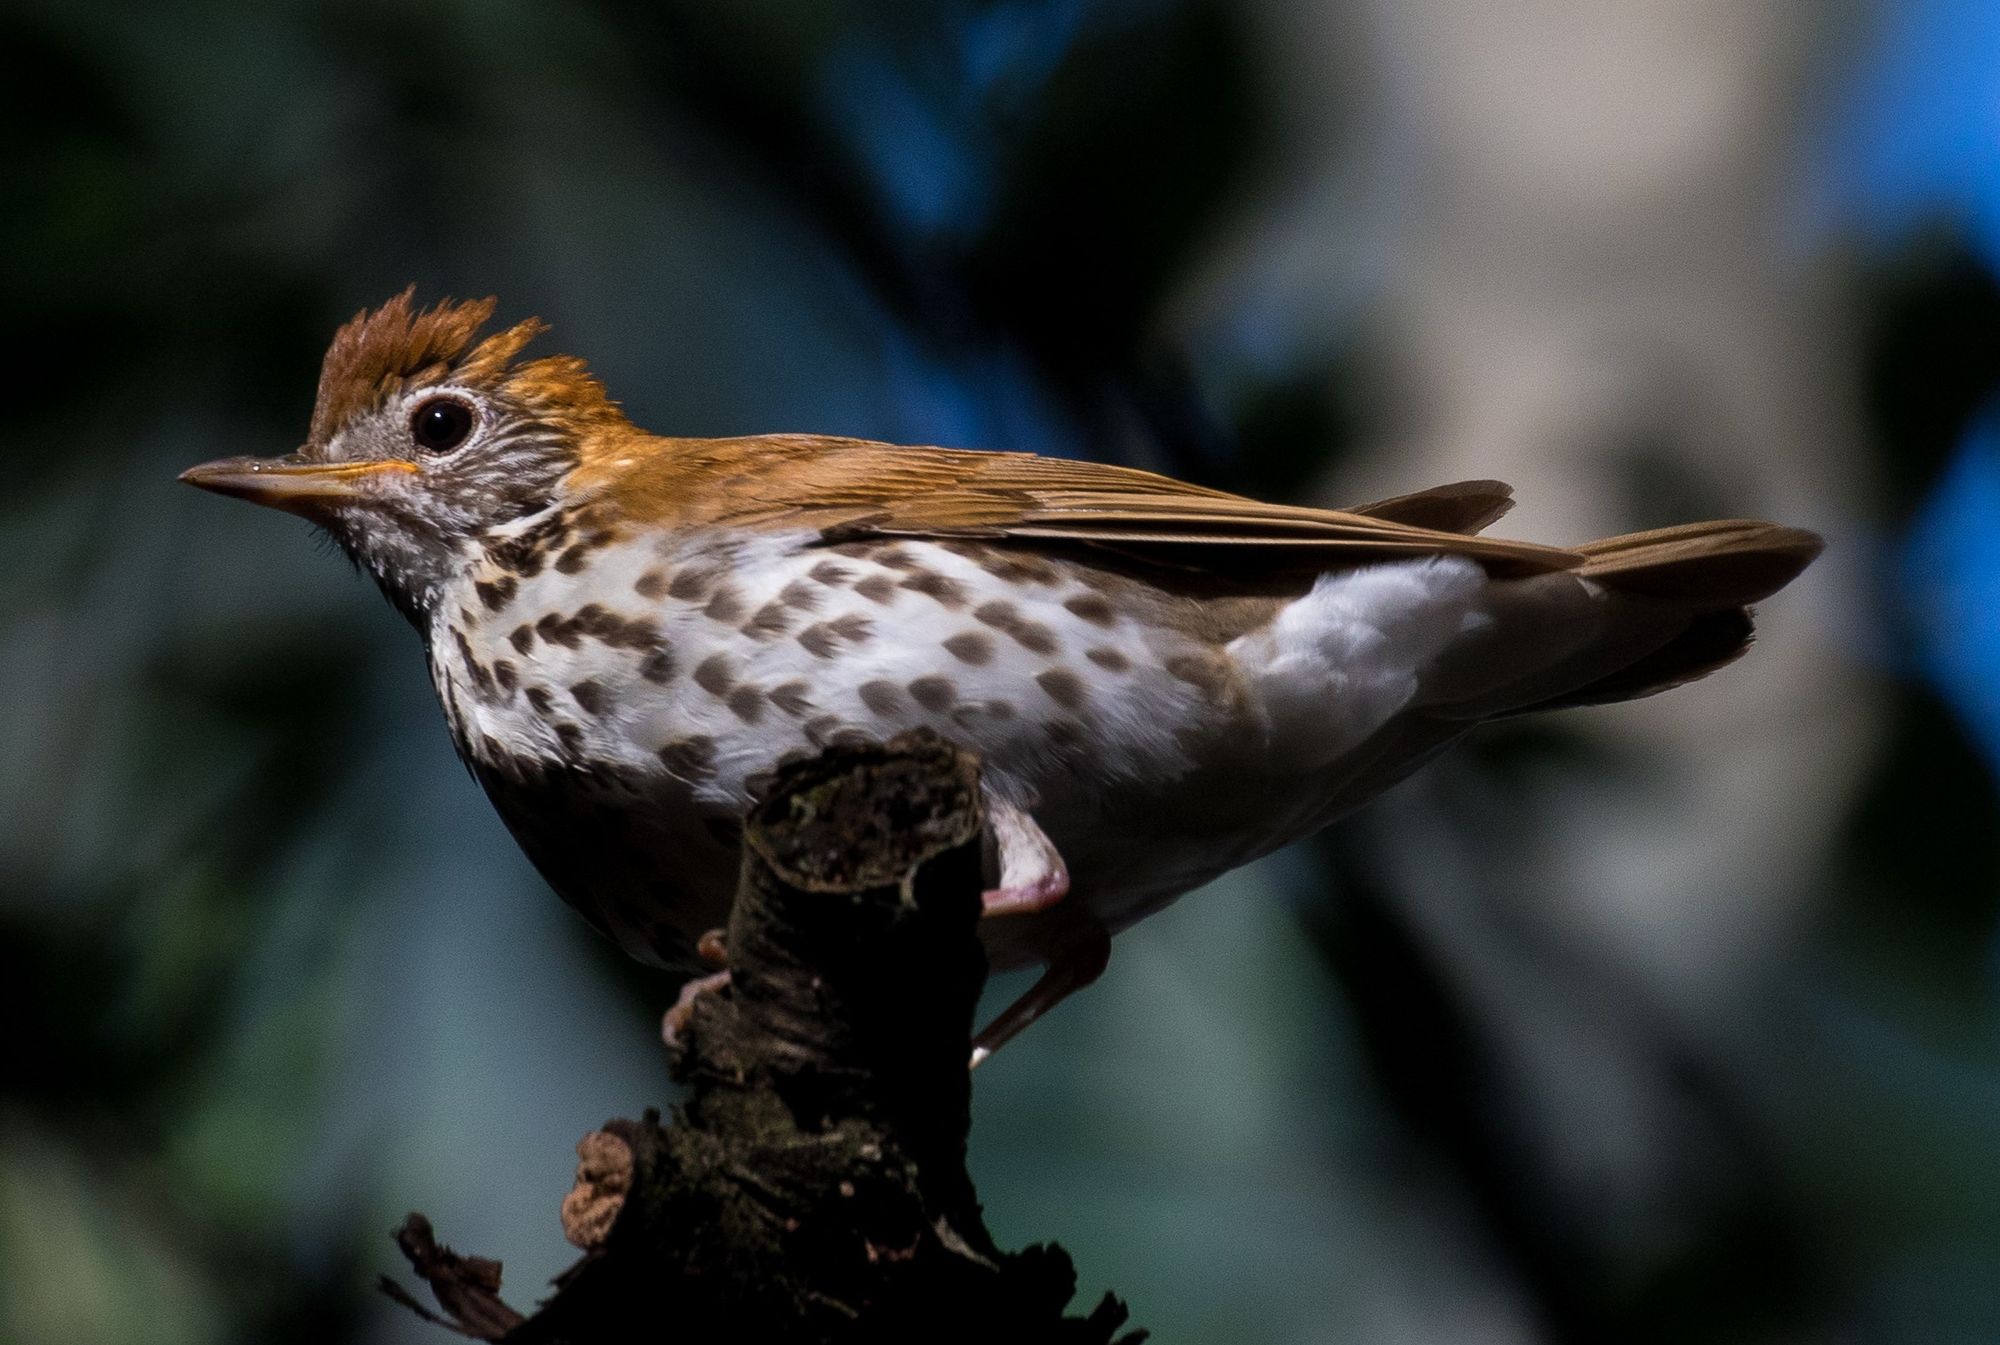 Bird populations can tell the story of development